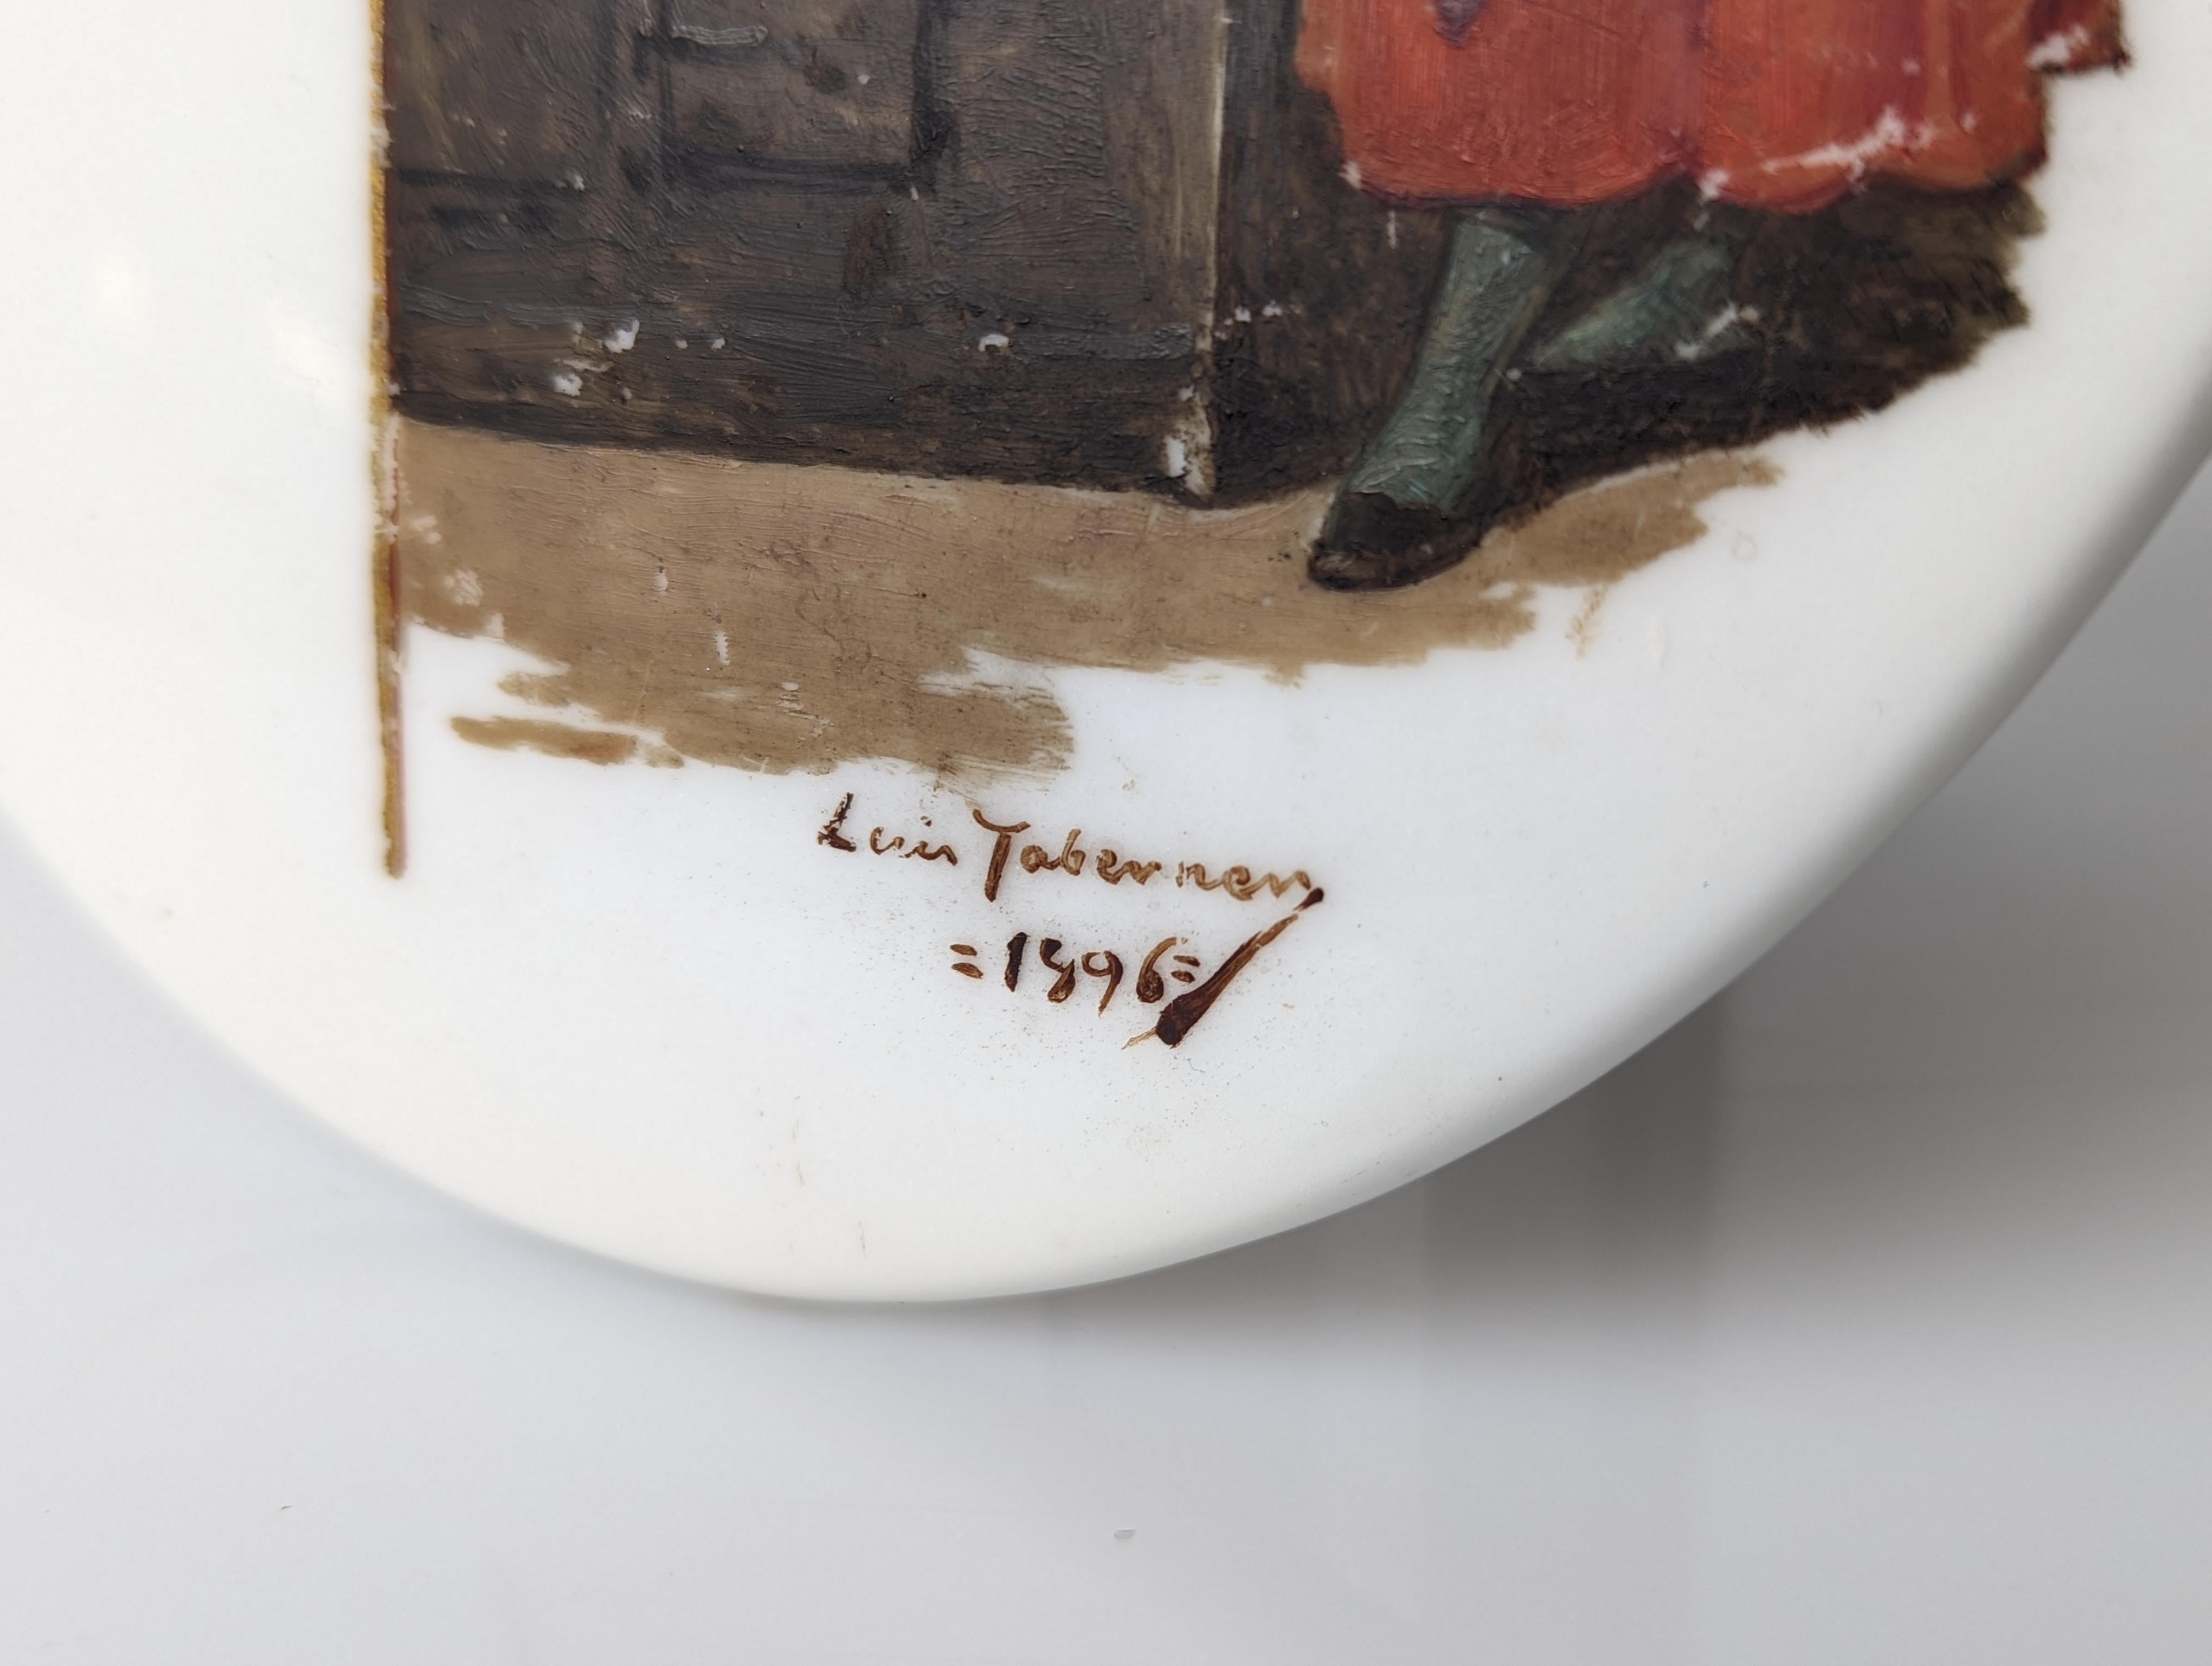 Hand-Painted Oil by Luis Taberner Y Montalvo on Porcelain, 19th Century For Sale